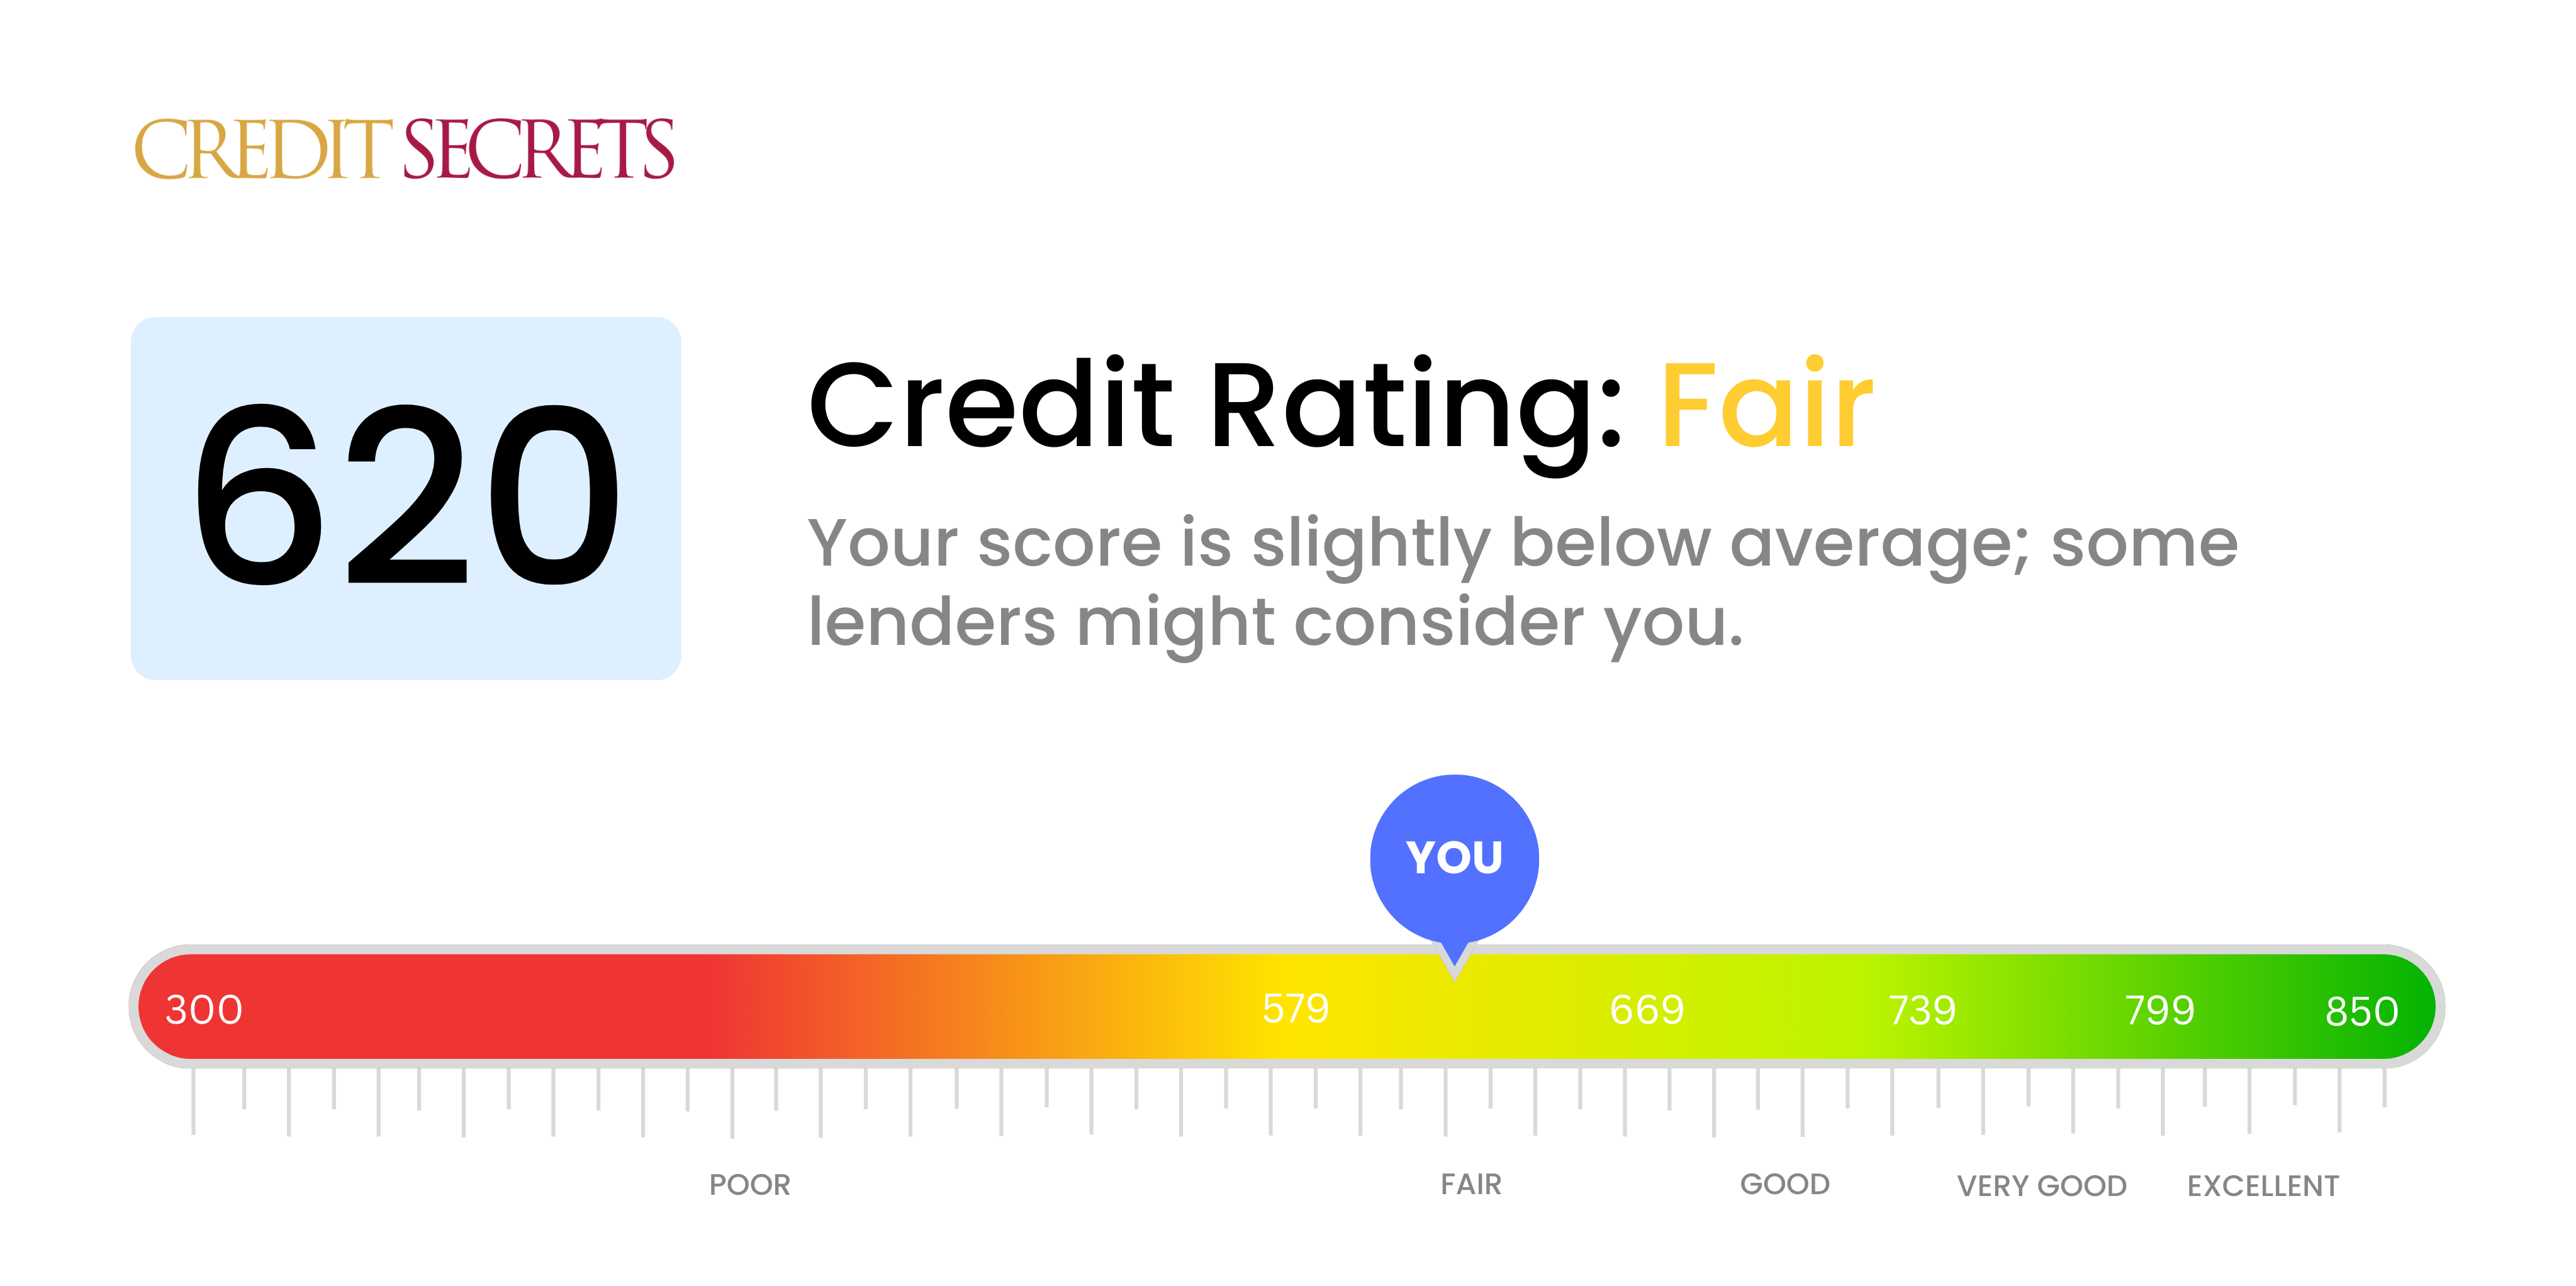 Is 620 a good credit score?